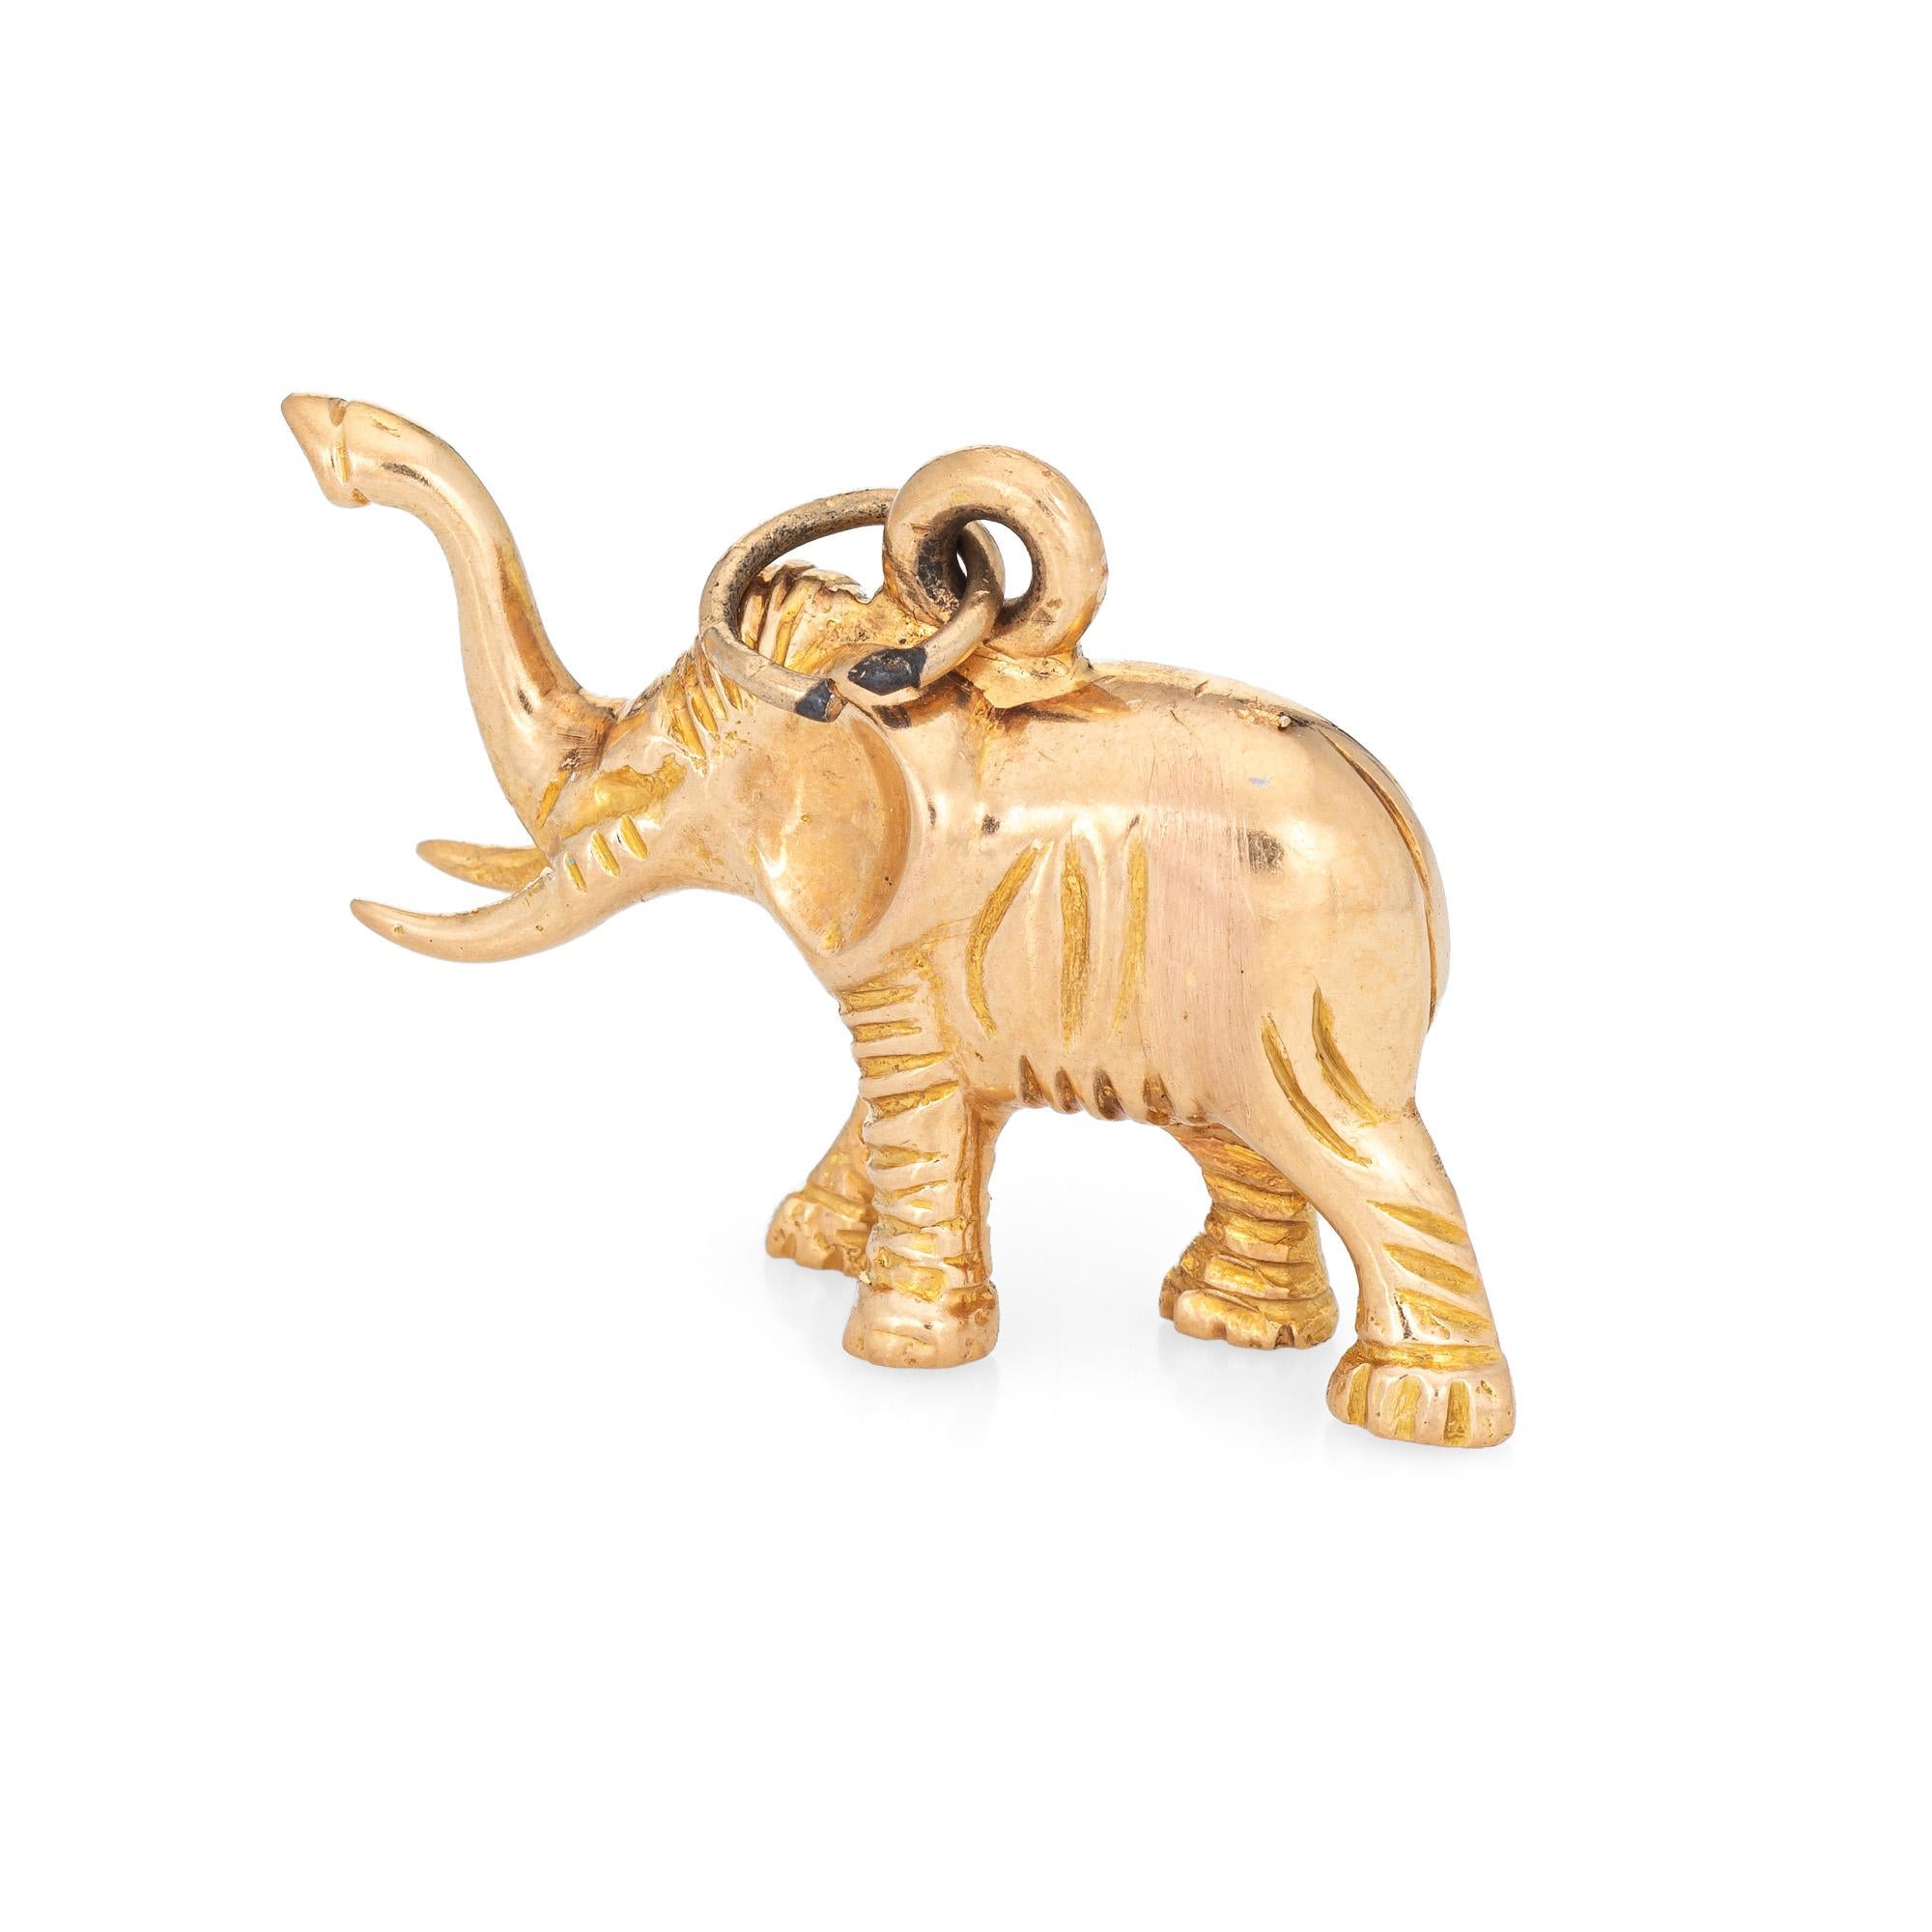 Finely detailed vintage Elephant charm crafted in 18k yellow gold.  

The elephant is in standing pose with it's trunk raised. The charm is solid with a heavier weight feel to the touch (10.3 grams). The piece can be worn as charm on a bracelet or